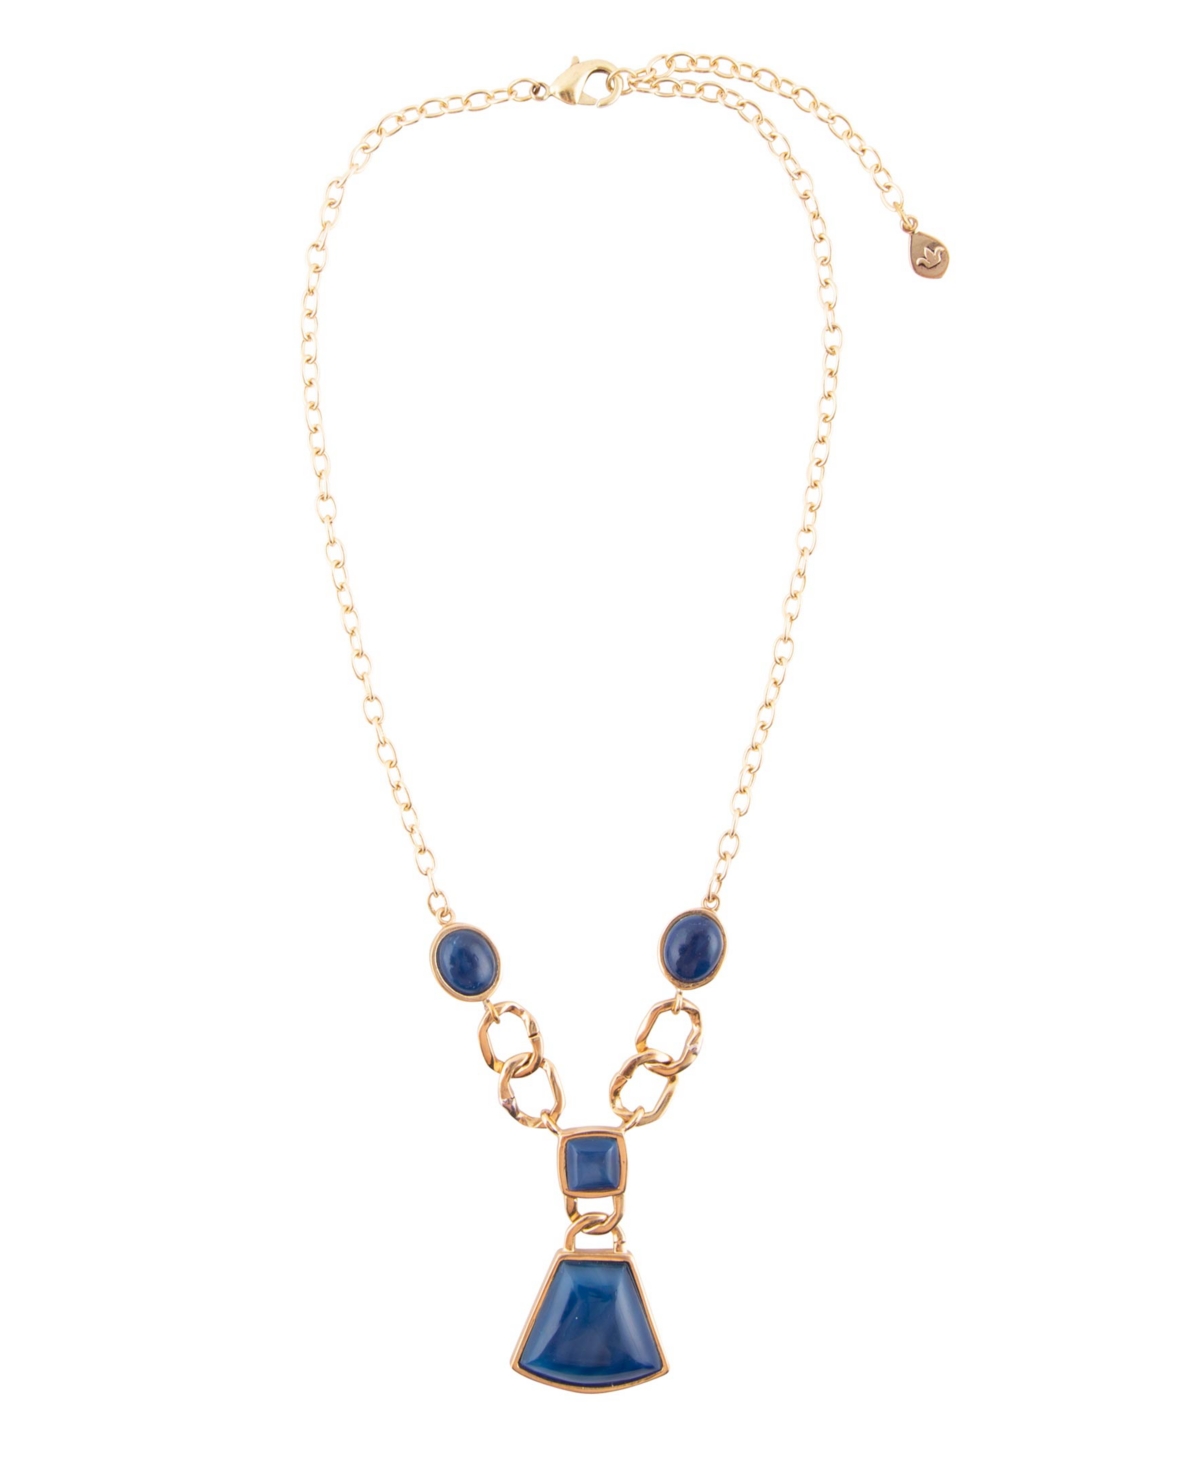 Barse Atehena Genuine Blue Agate Abstract Statement Necklace